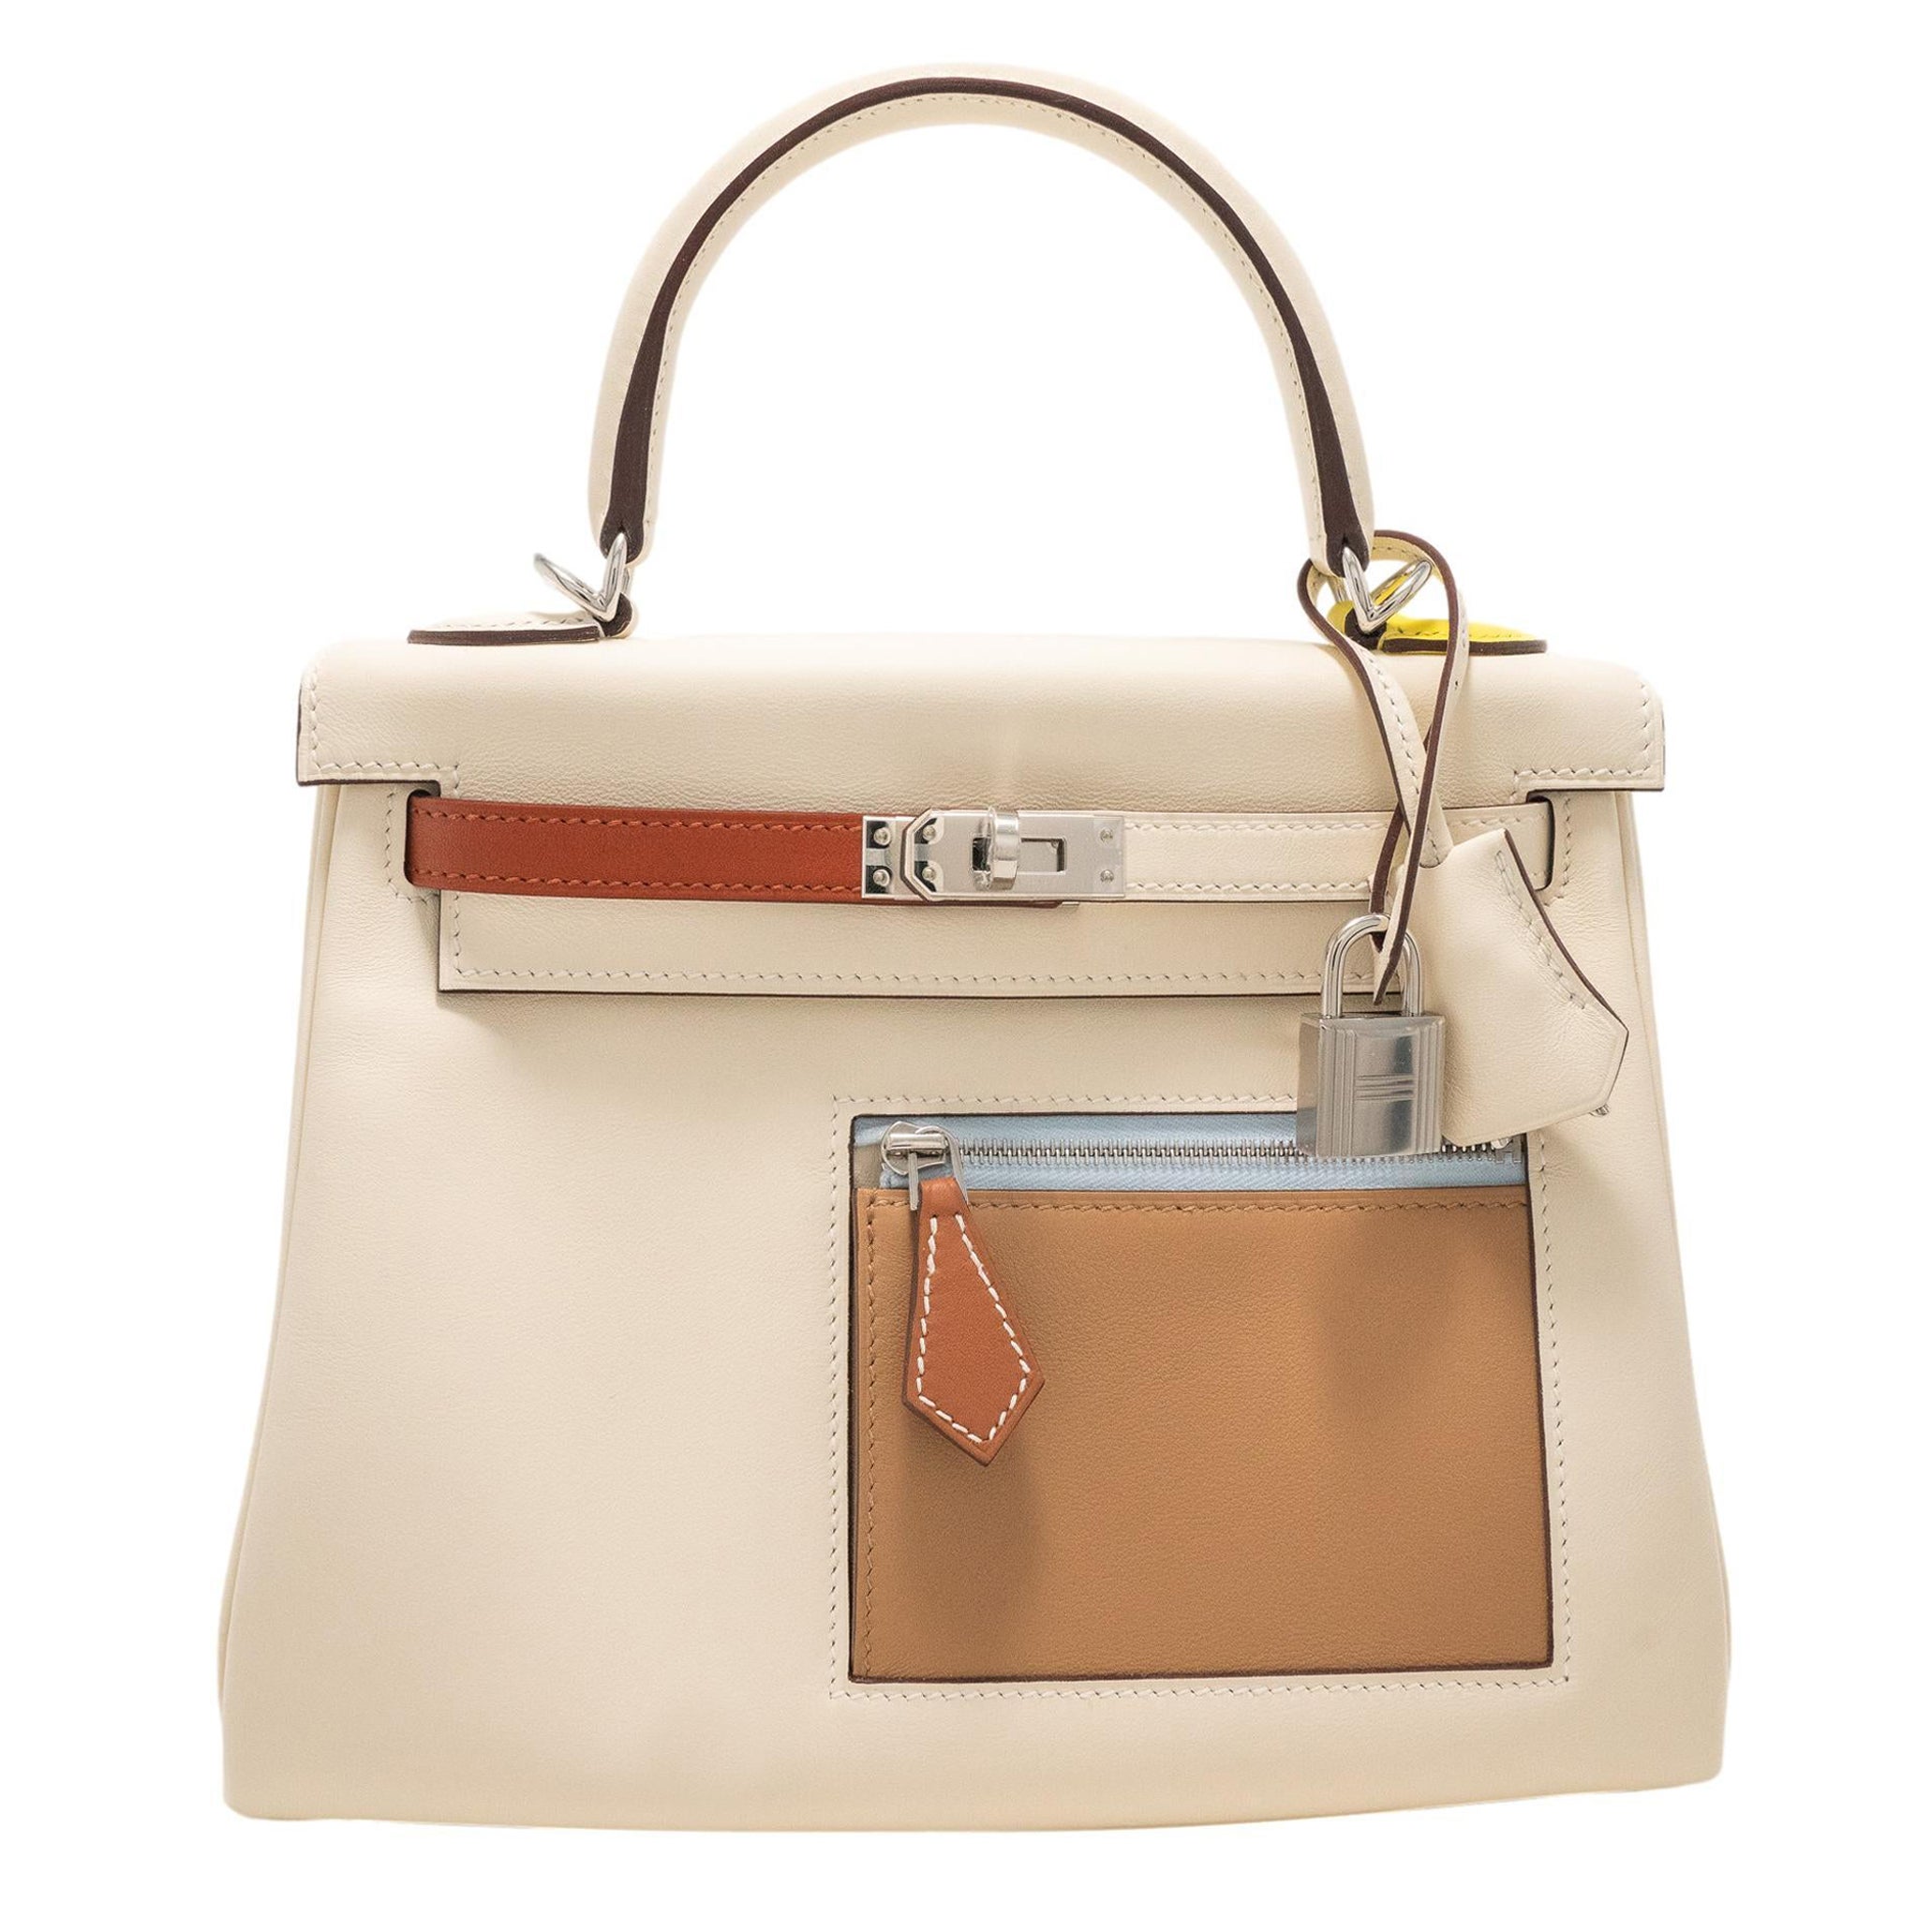 HERMES Kelly 25 Retourne Colormatic "Nata" Swift Leather PHW Limited Edition  en vente